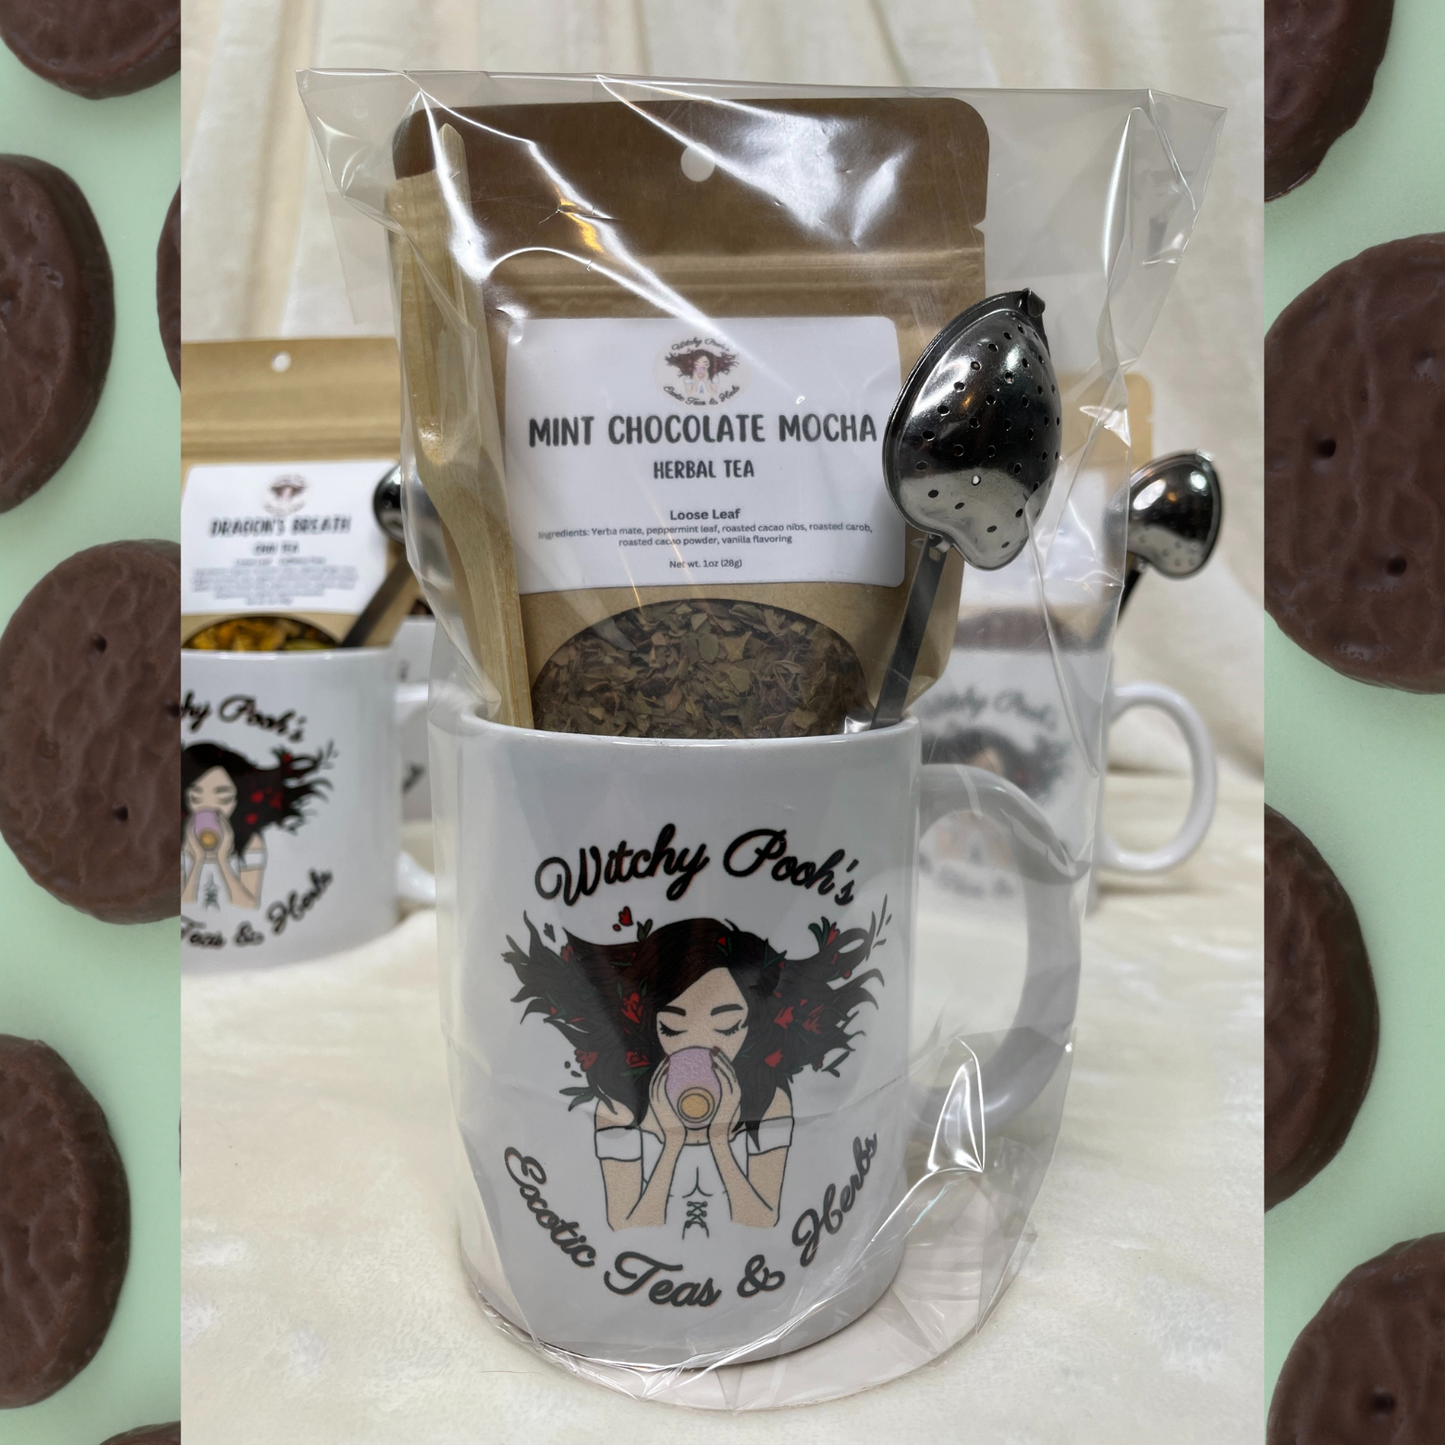 Witchy Pooh's Gift Mugs Sets Come with 1oz Pouch of Loose Leaf Tea, Heart Shaped Tea Strainer with Handle and a Wooden Spoon in a Witchy Pooh Mug